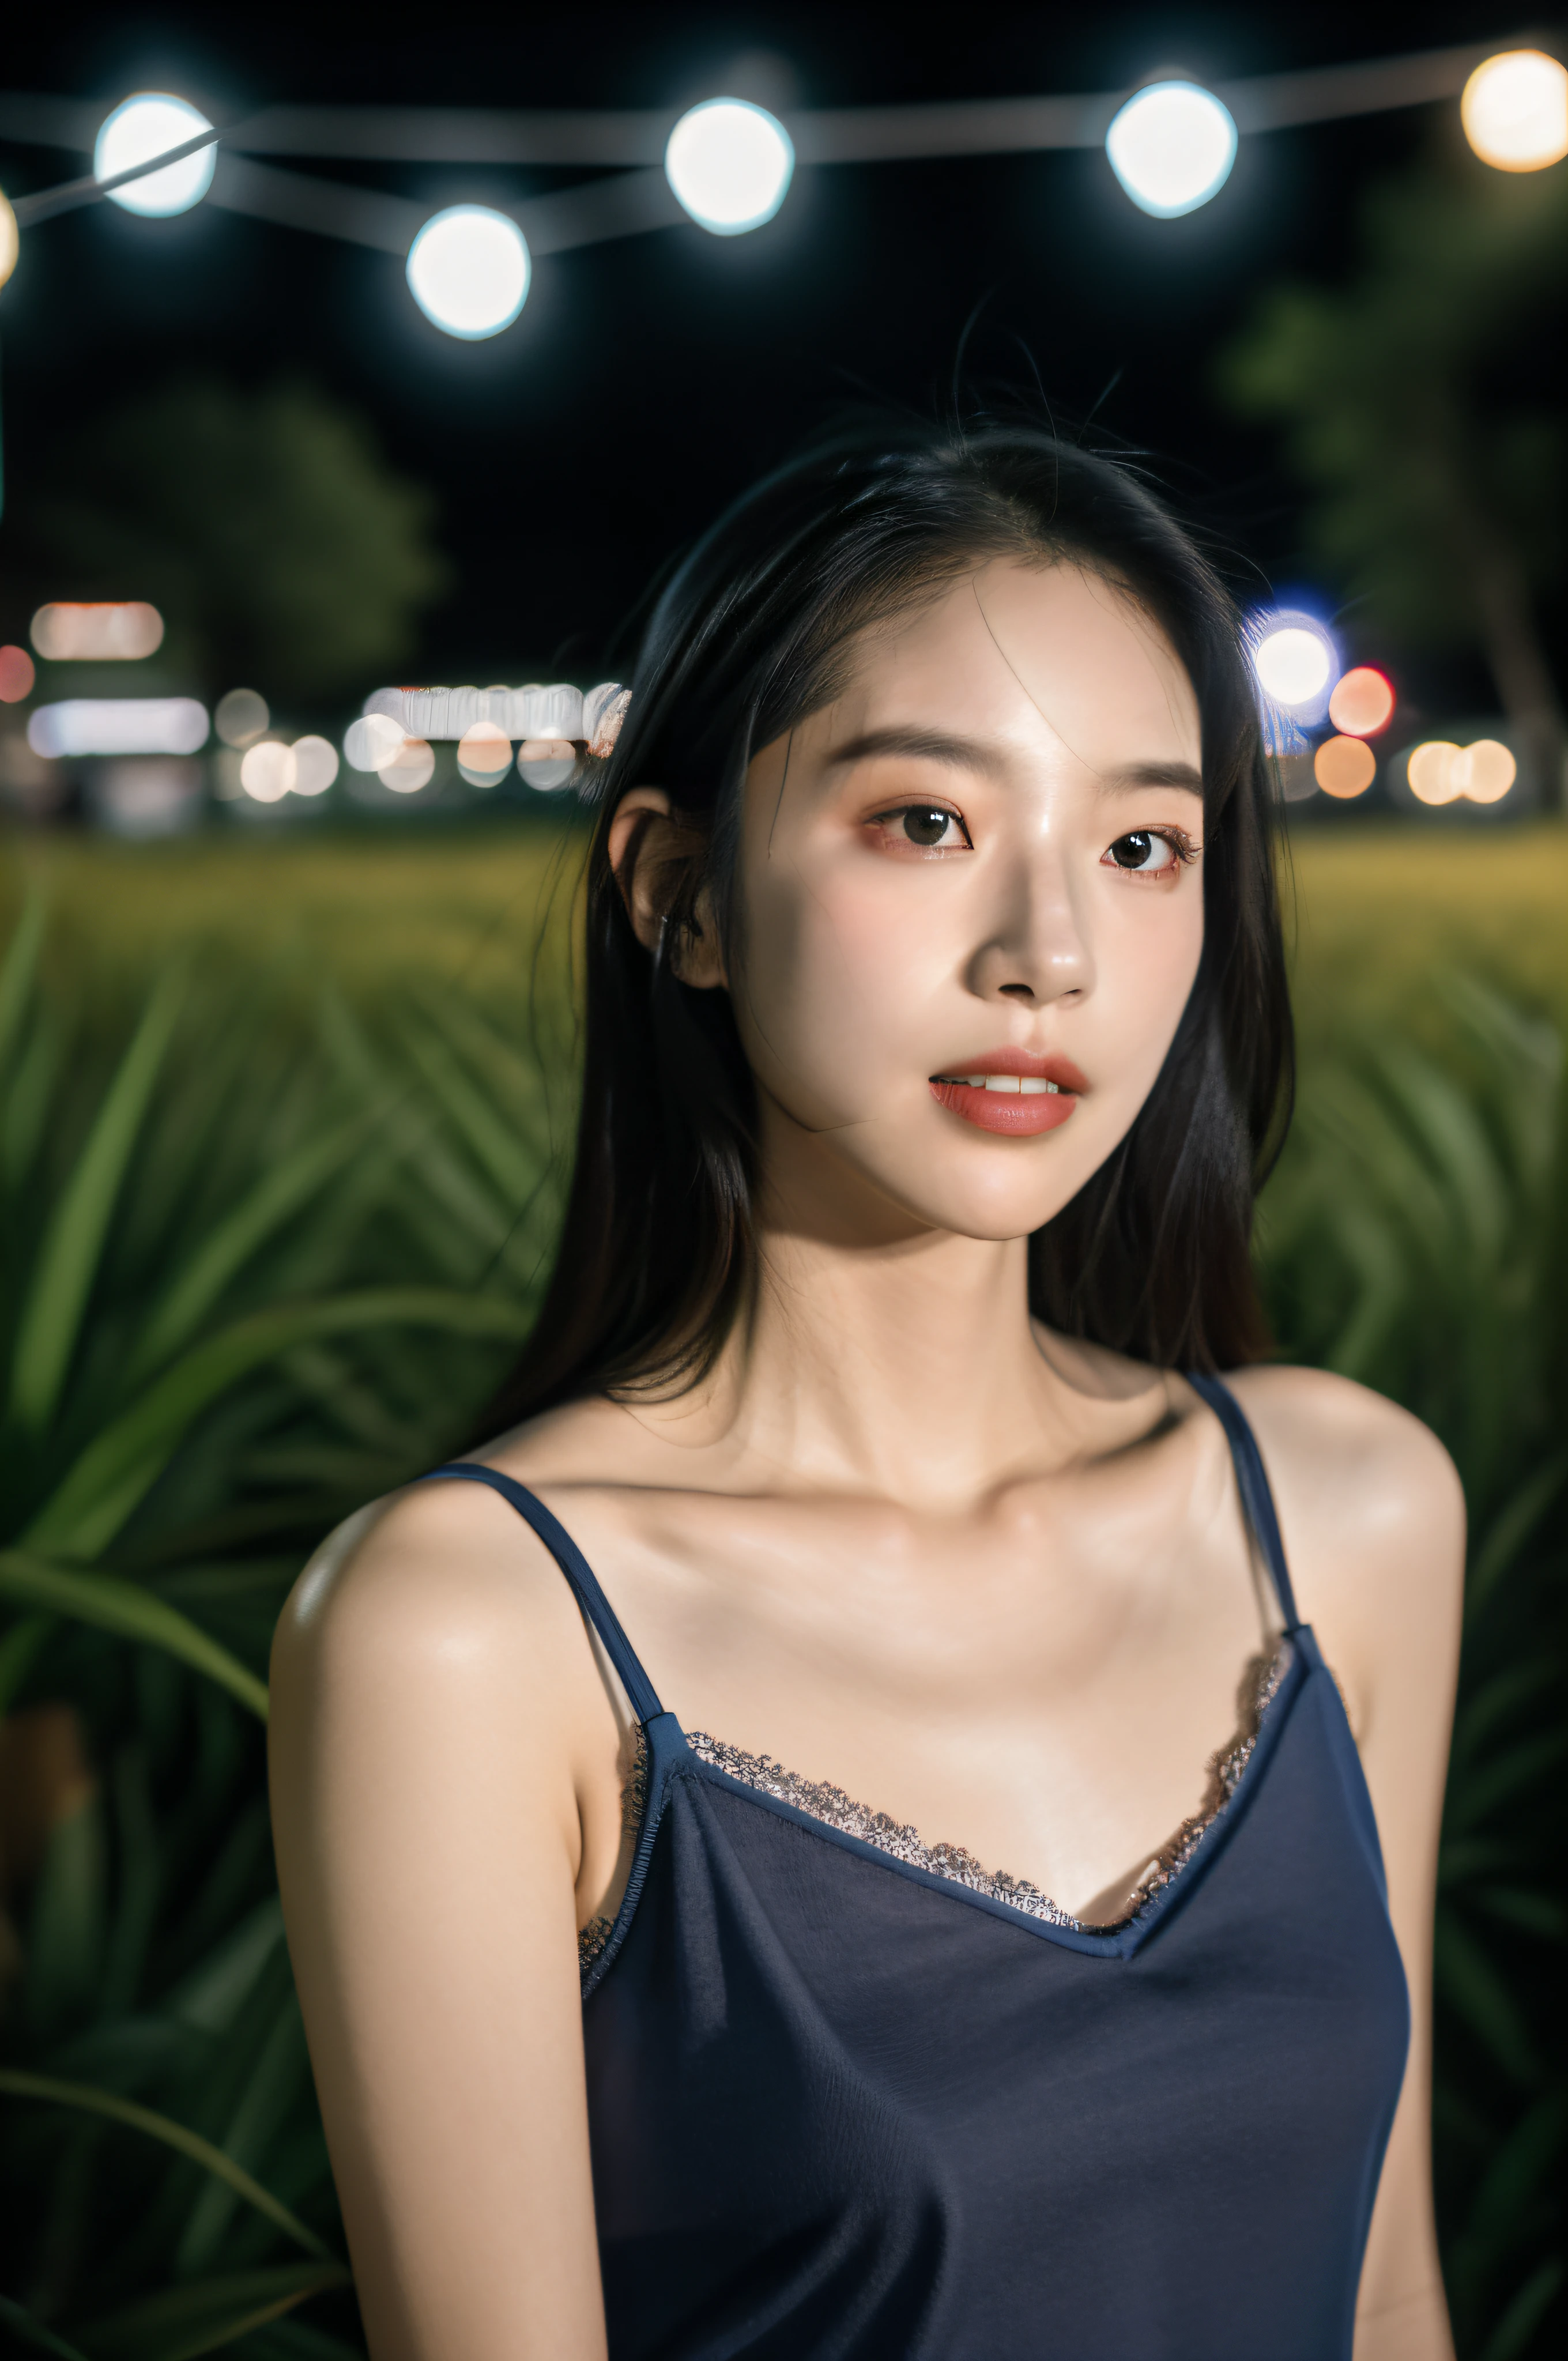 1girls，idolannequin，deep of field，Photo showing，filmes，Side face，Ruffle your hair，Look in the other direction，Skinny，Haha，fcollarbone，teeth，long way hair，Lazy，filmes，camisole，selfee，Night，Boyfriend perspective